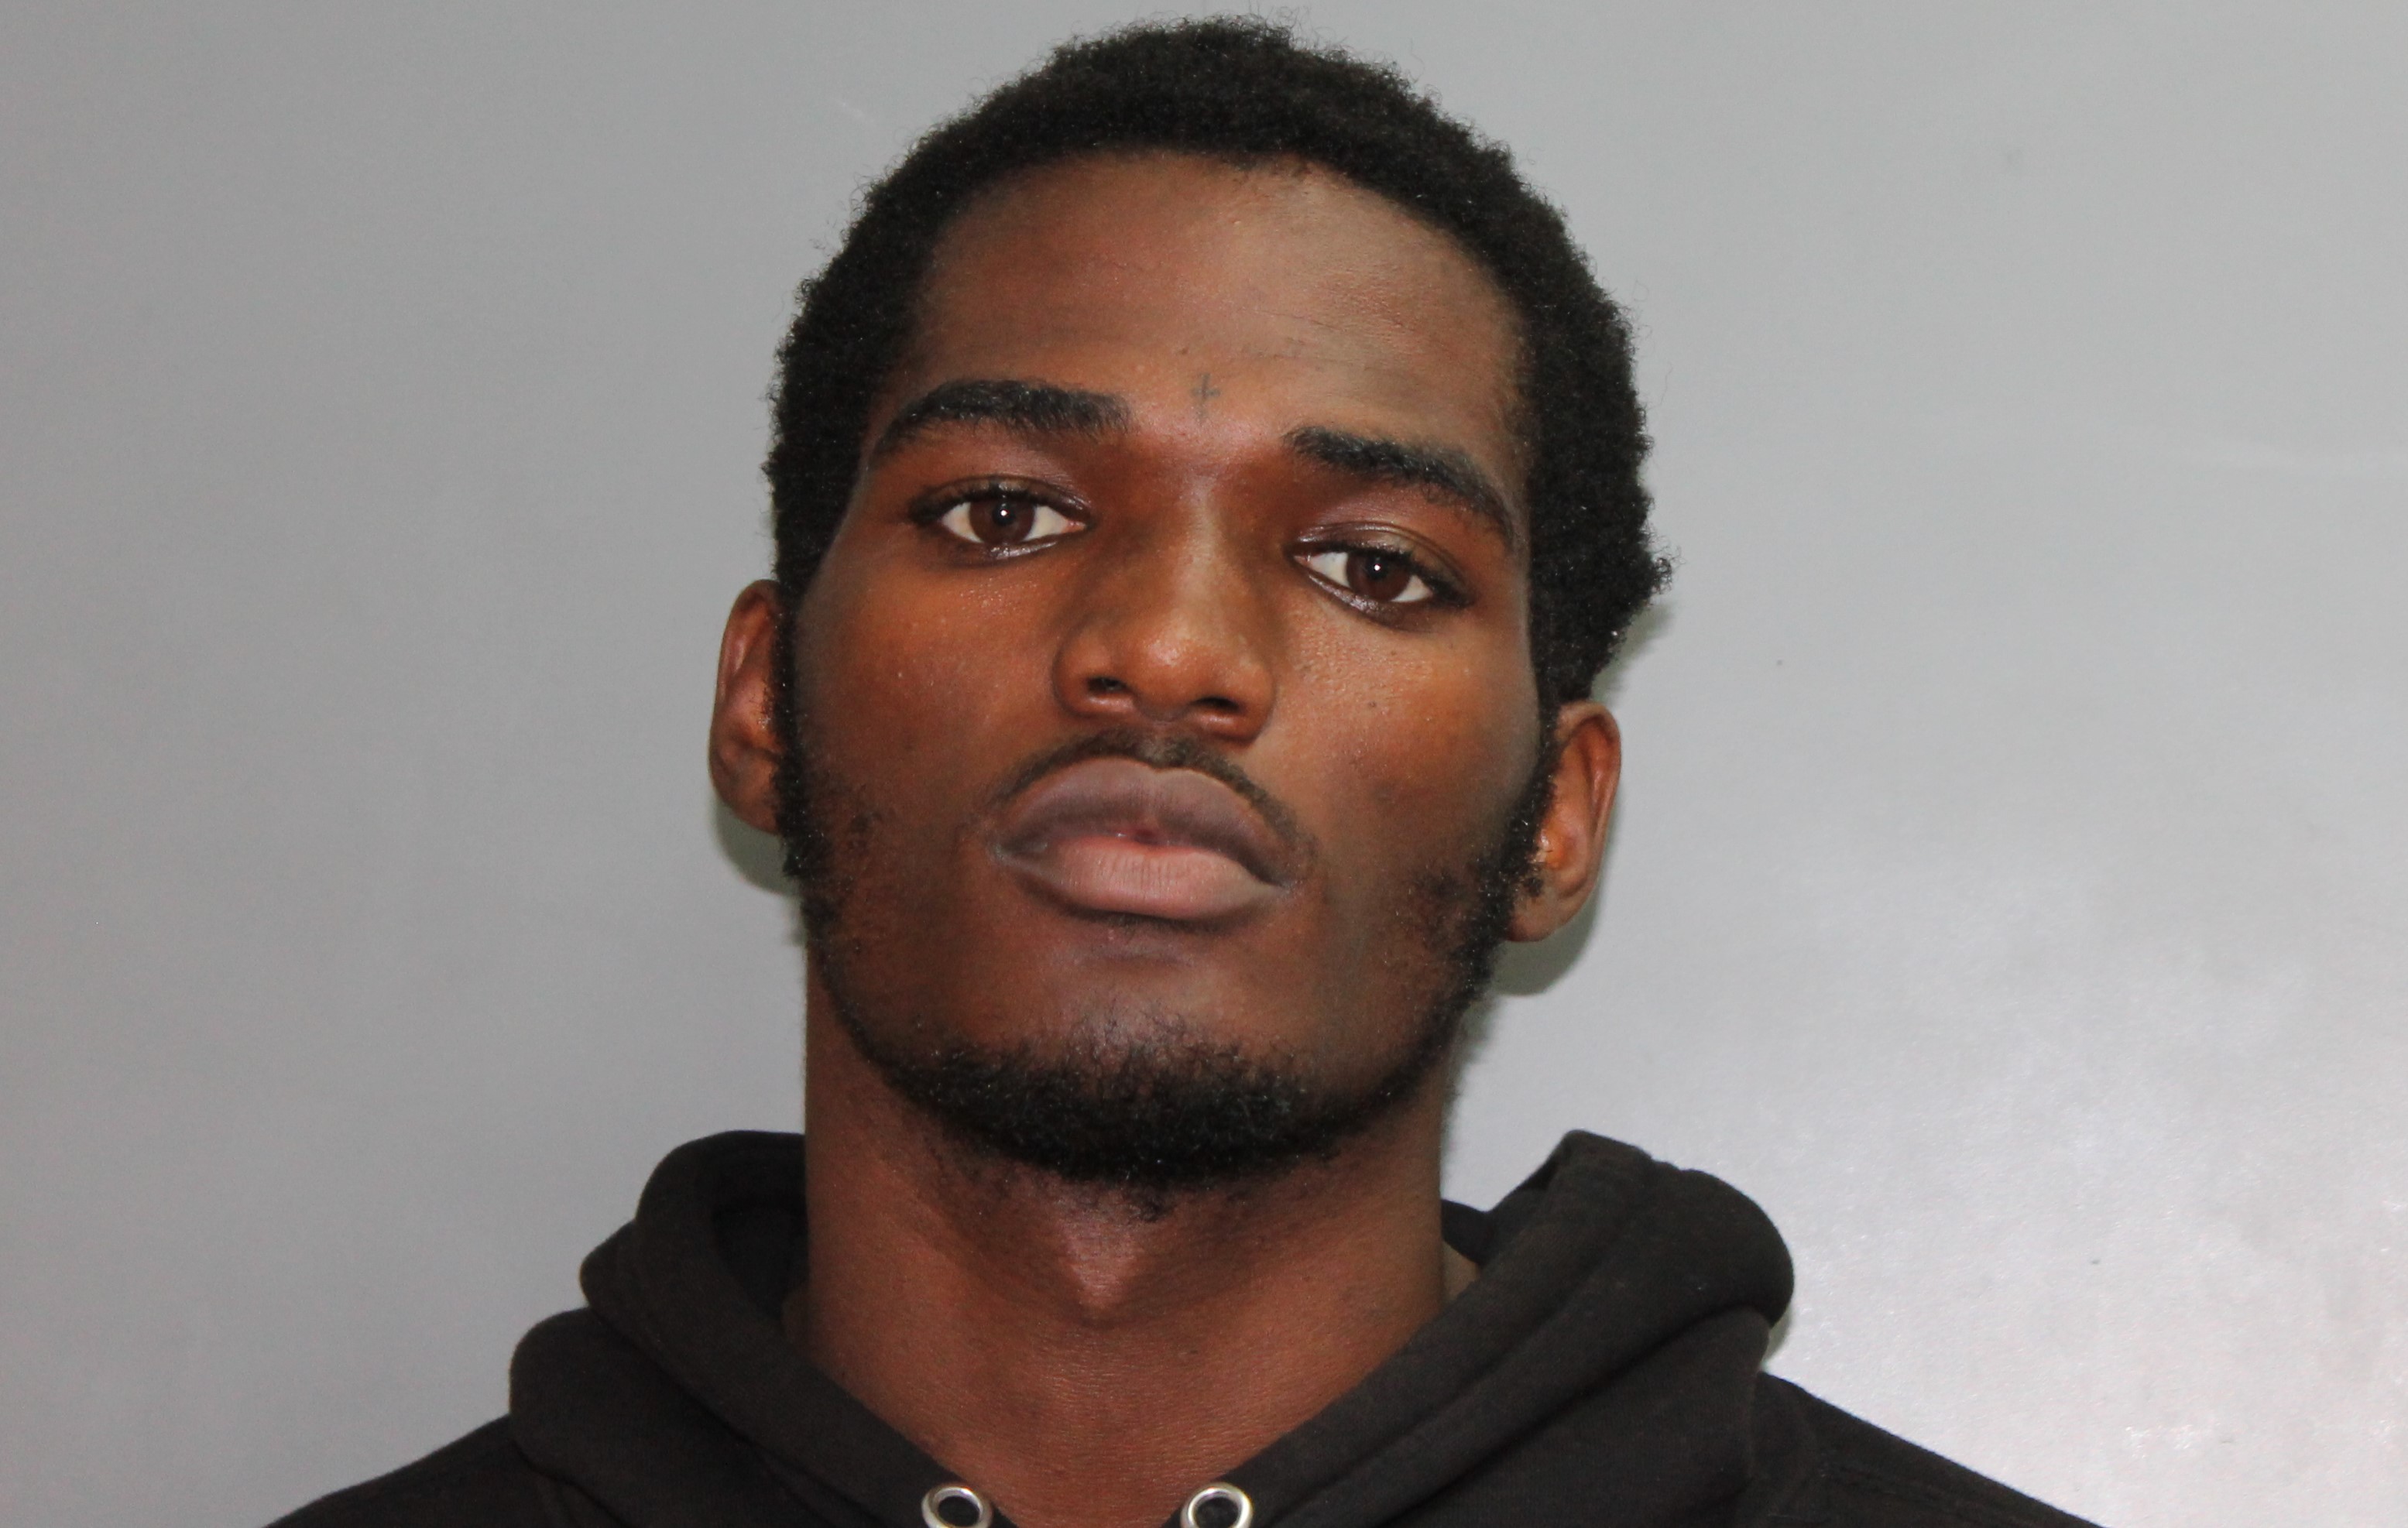 'Armed And Dangerous' Wanted St. Croix Man Found By Police Armed, But Not Dangerous